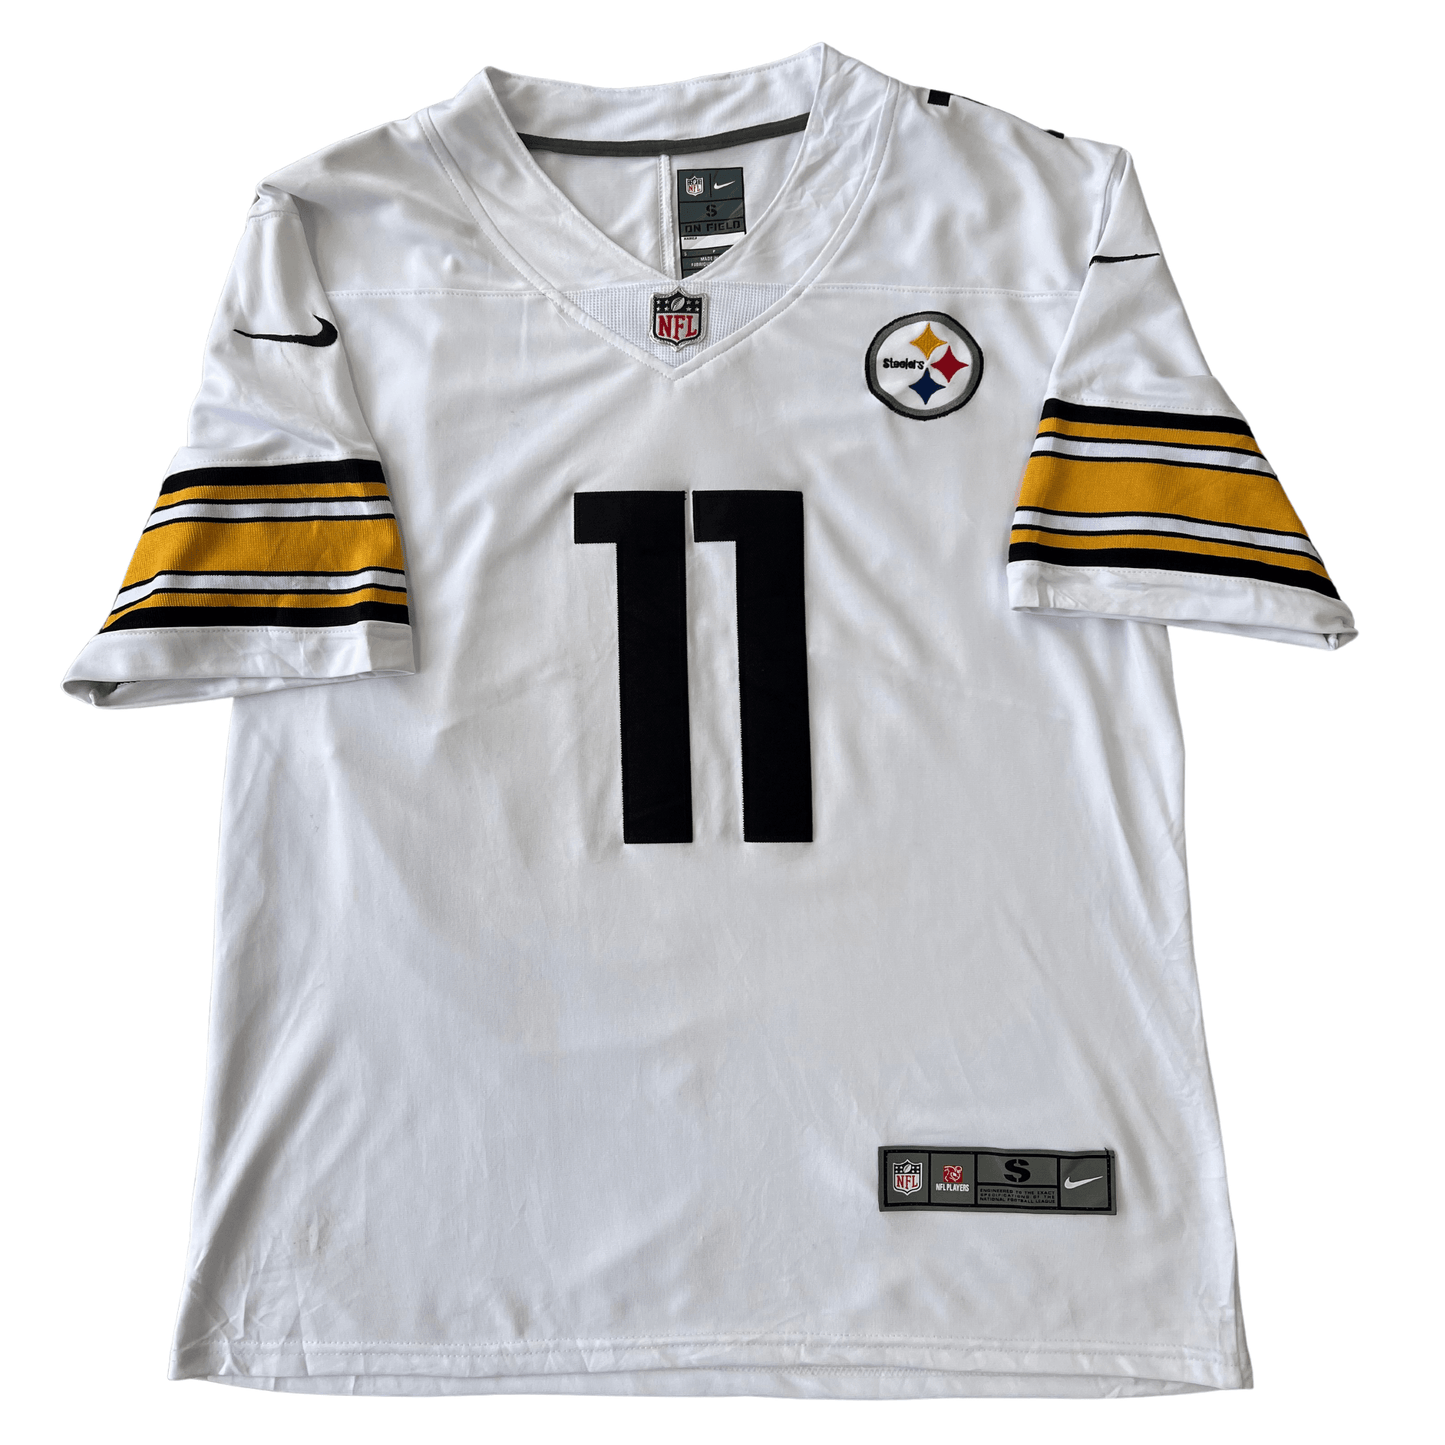 Pittsburg Steelers White Jersey Front - Chase Claypool